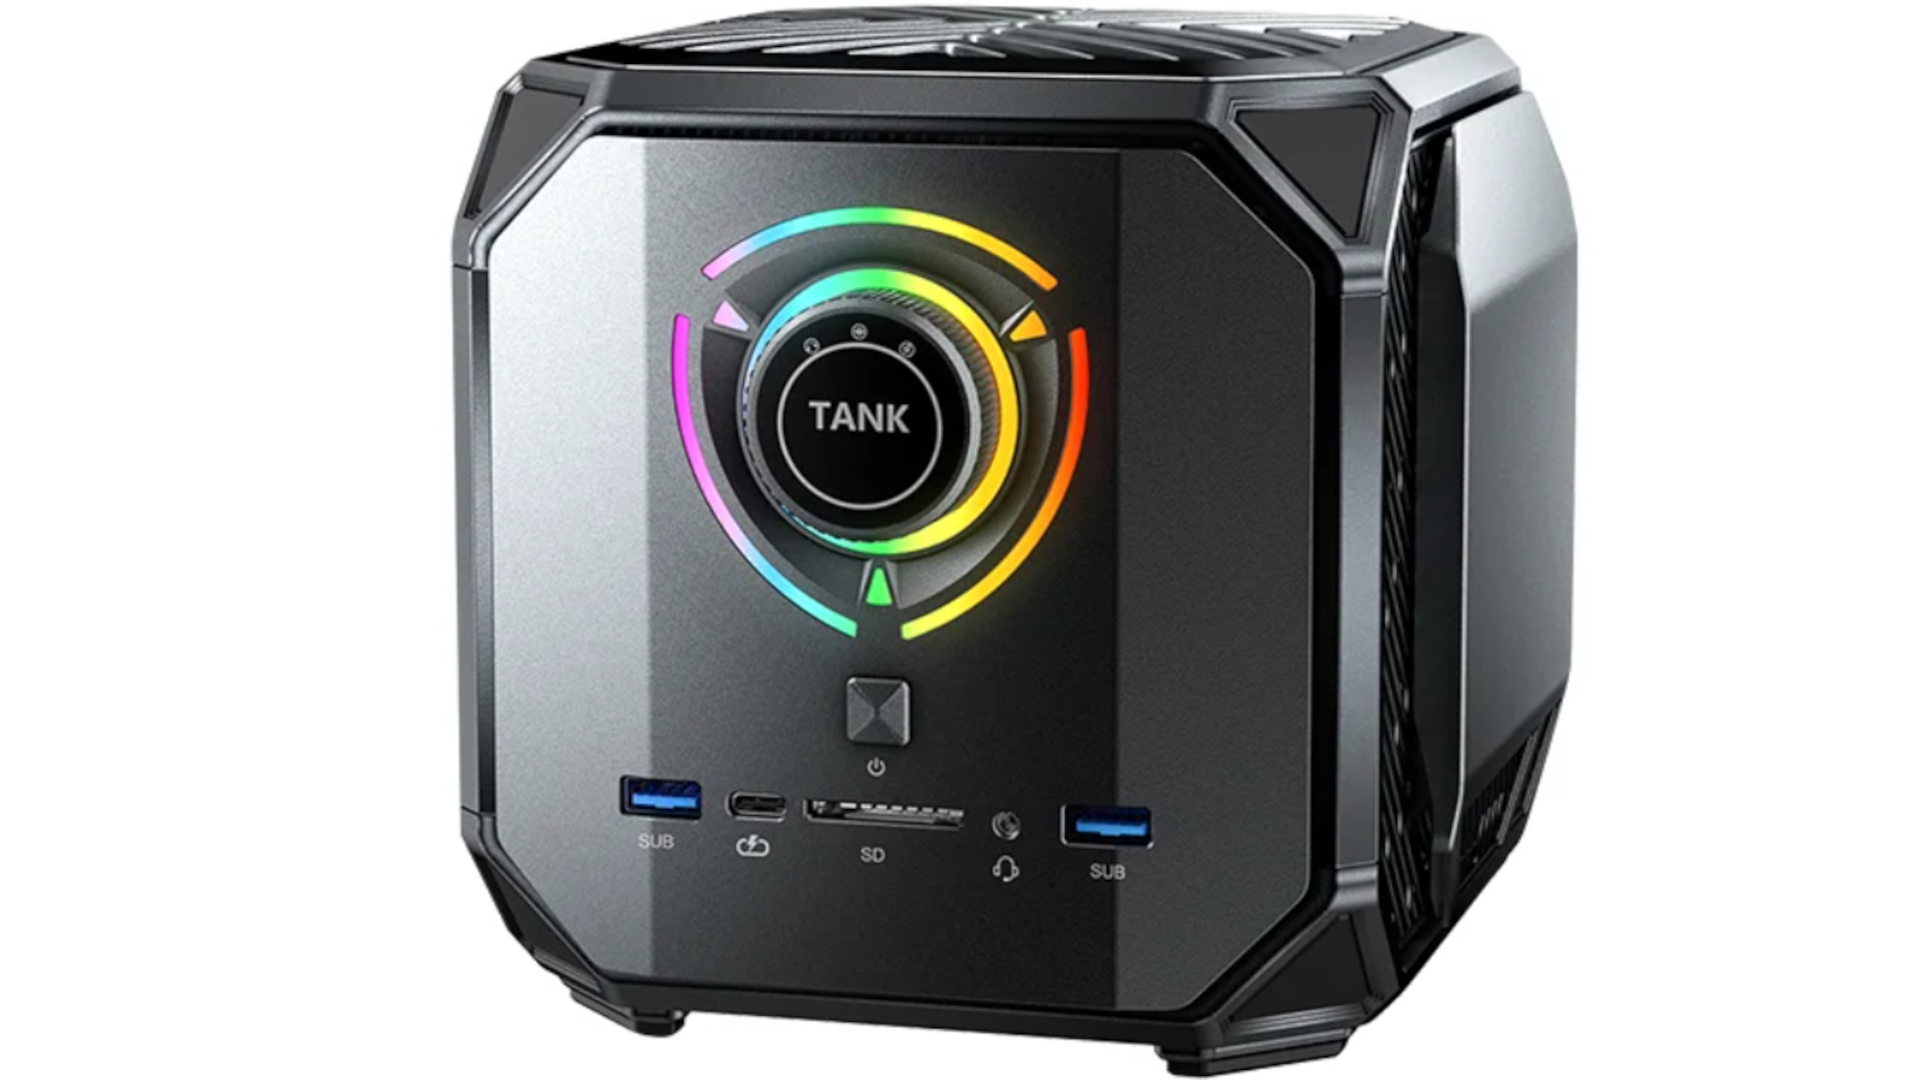 The Fastest Mini PC We've Ever Gotten Our Hands On! ACEMAGIC TANK 03 